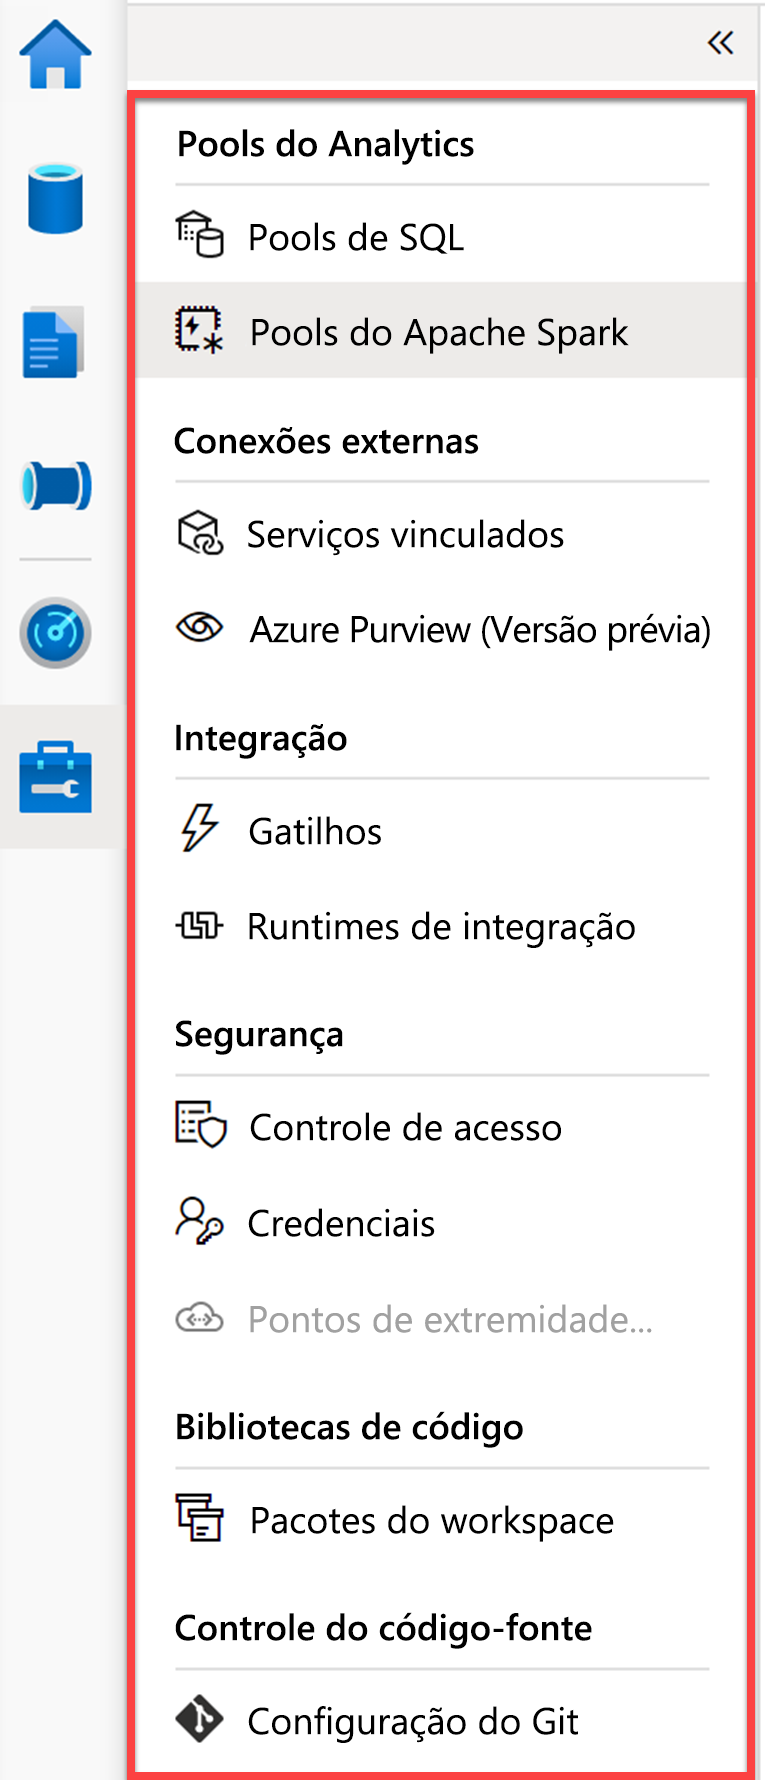 Using the Manage hub in Azure Synapse Studio